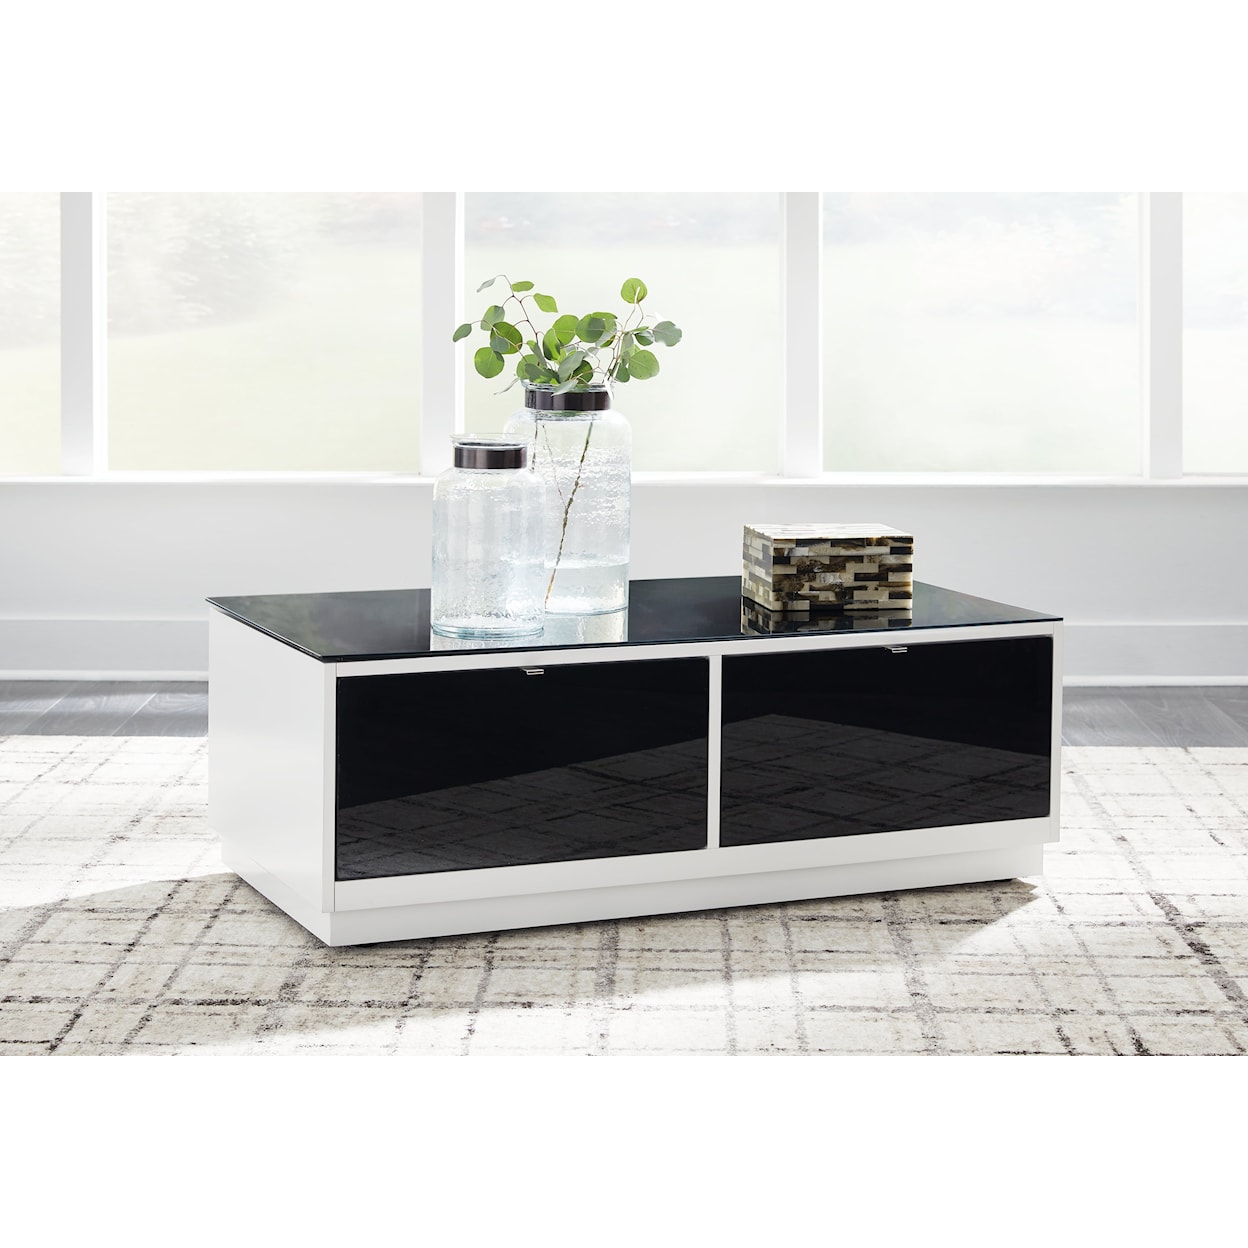 Signature Gardoni Coffee Table and 2 End Tables